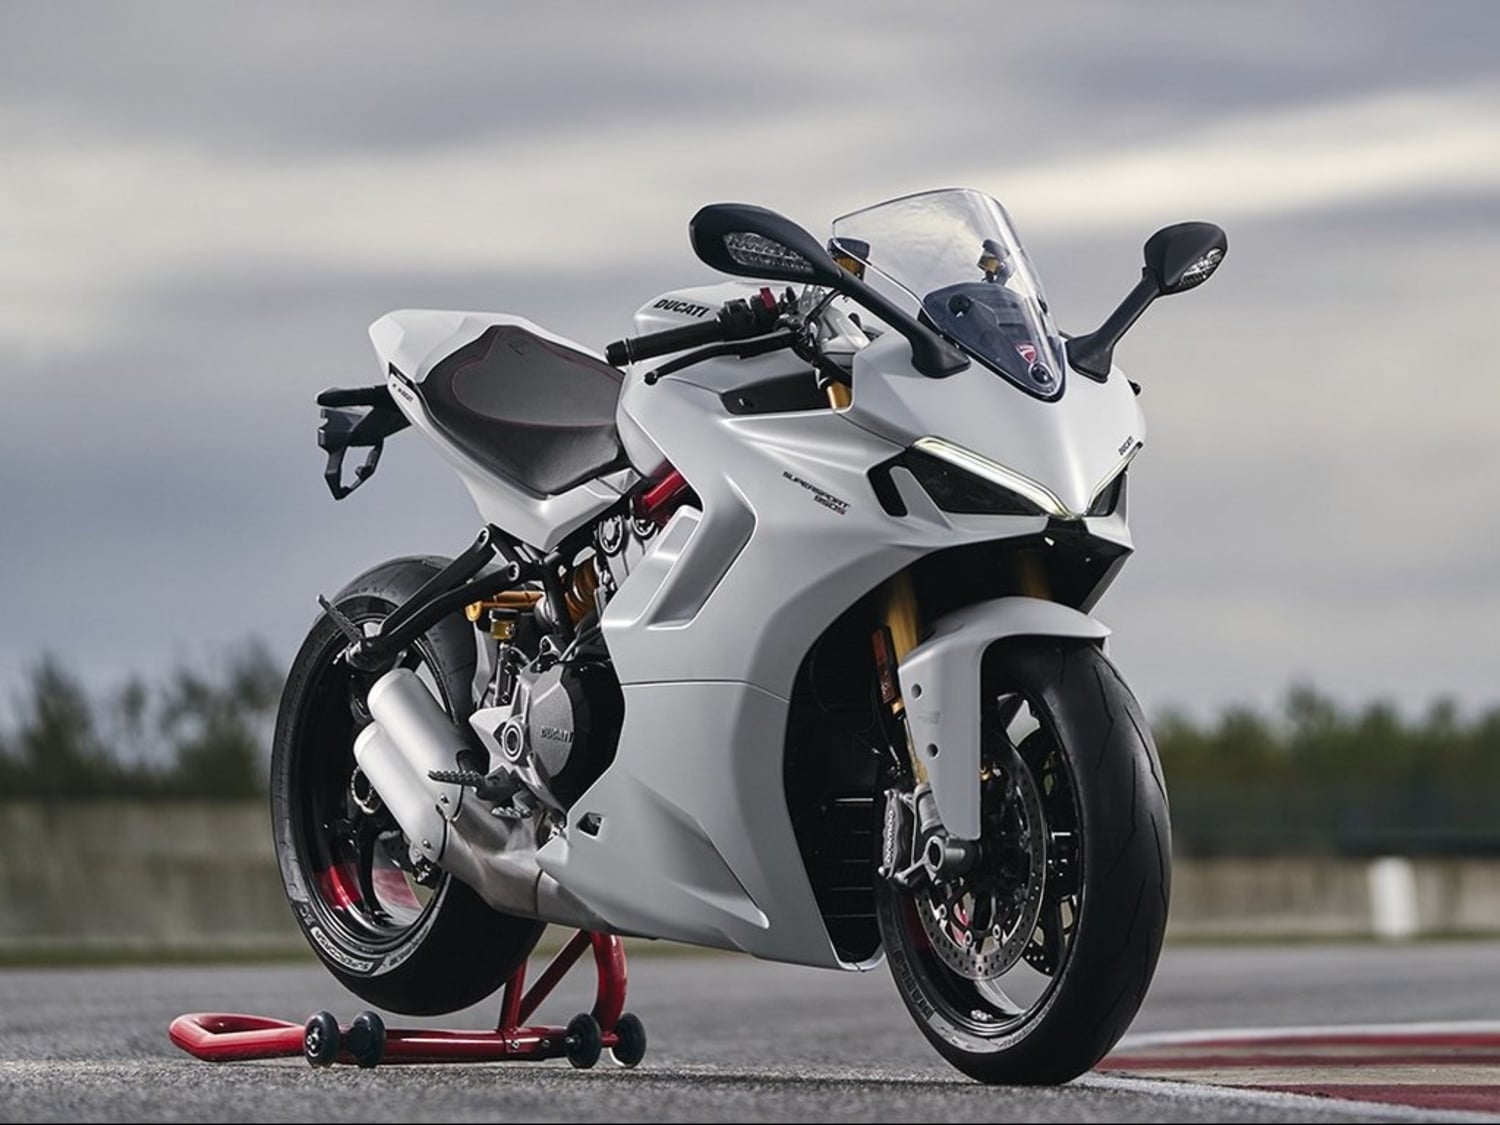 2021 Ducati Supersport 950 And 950 S Debut With Panigale Inspired Styling